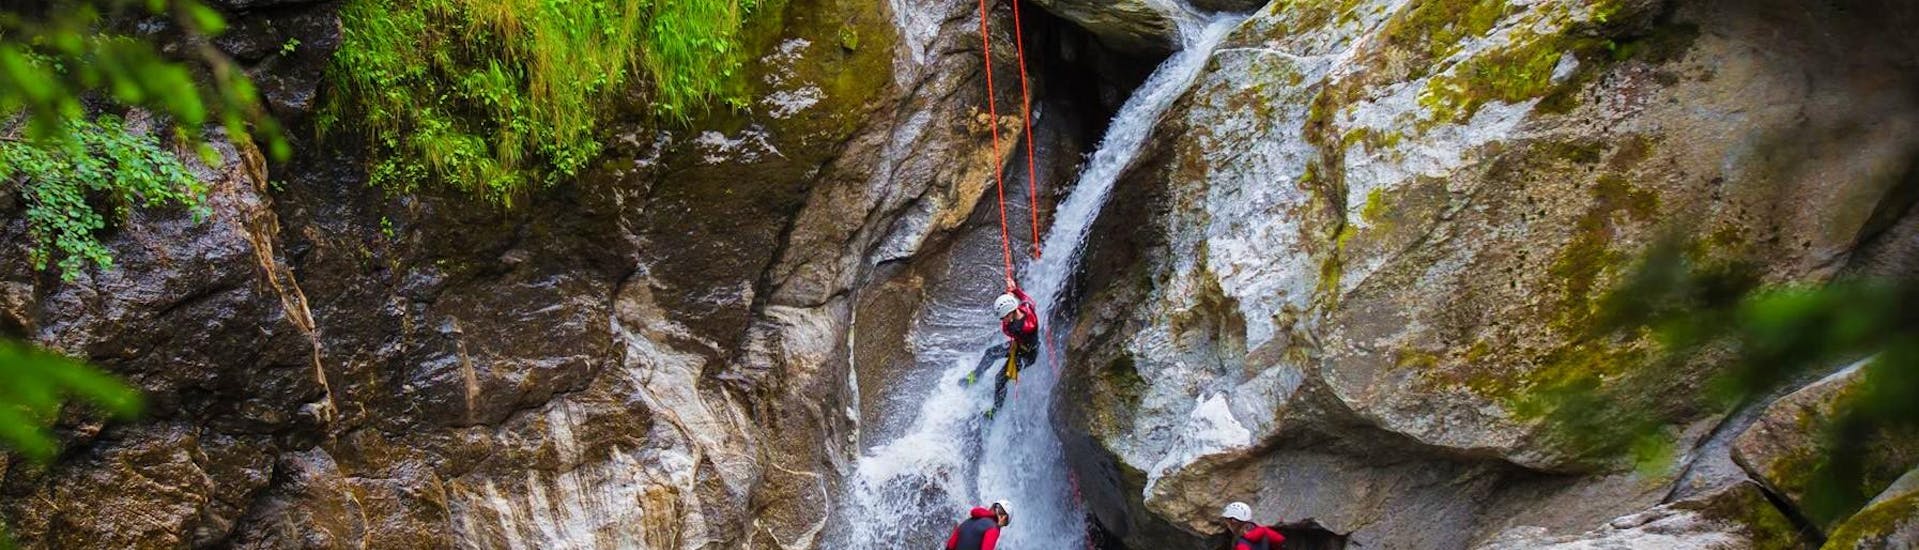 A group of participants is roping down a majestic waterfall during a canyoning tour in the Zillertal valley with Freiluftakademie.